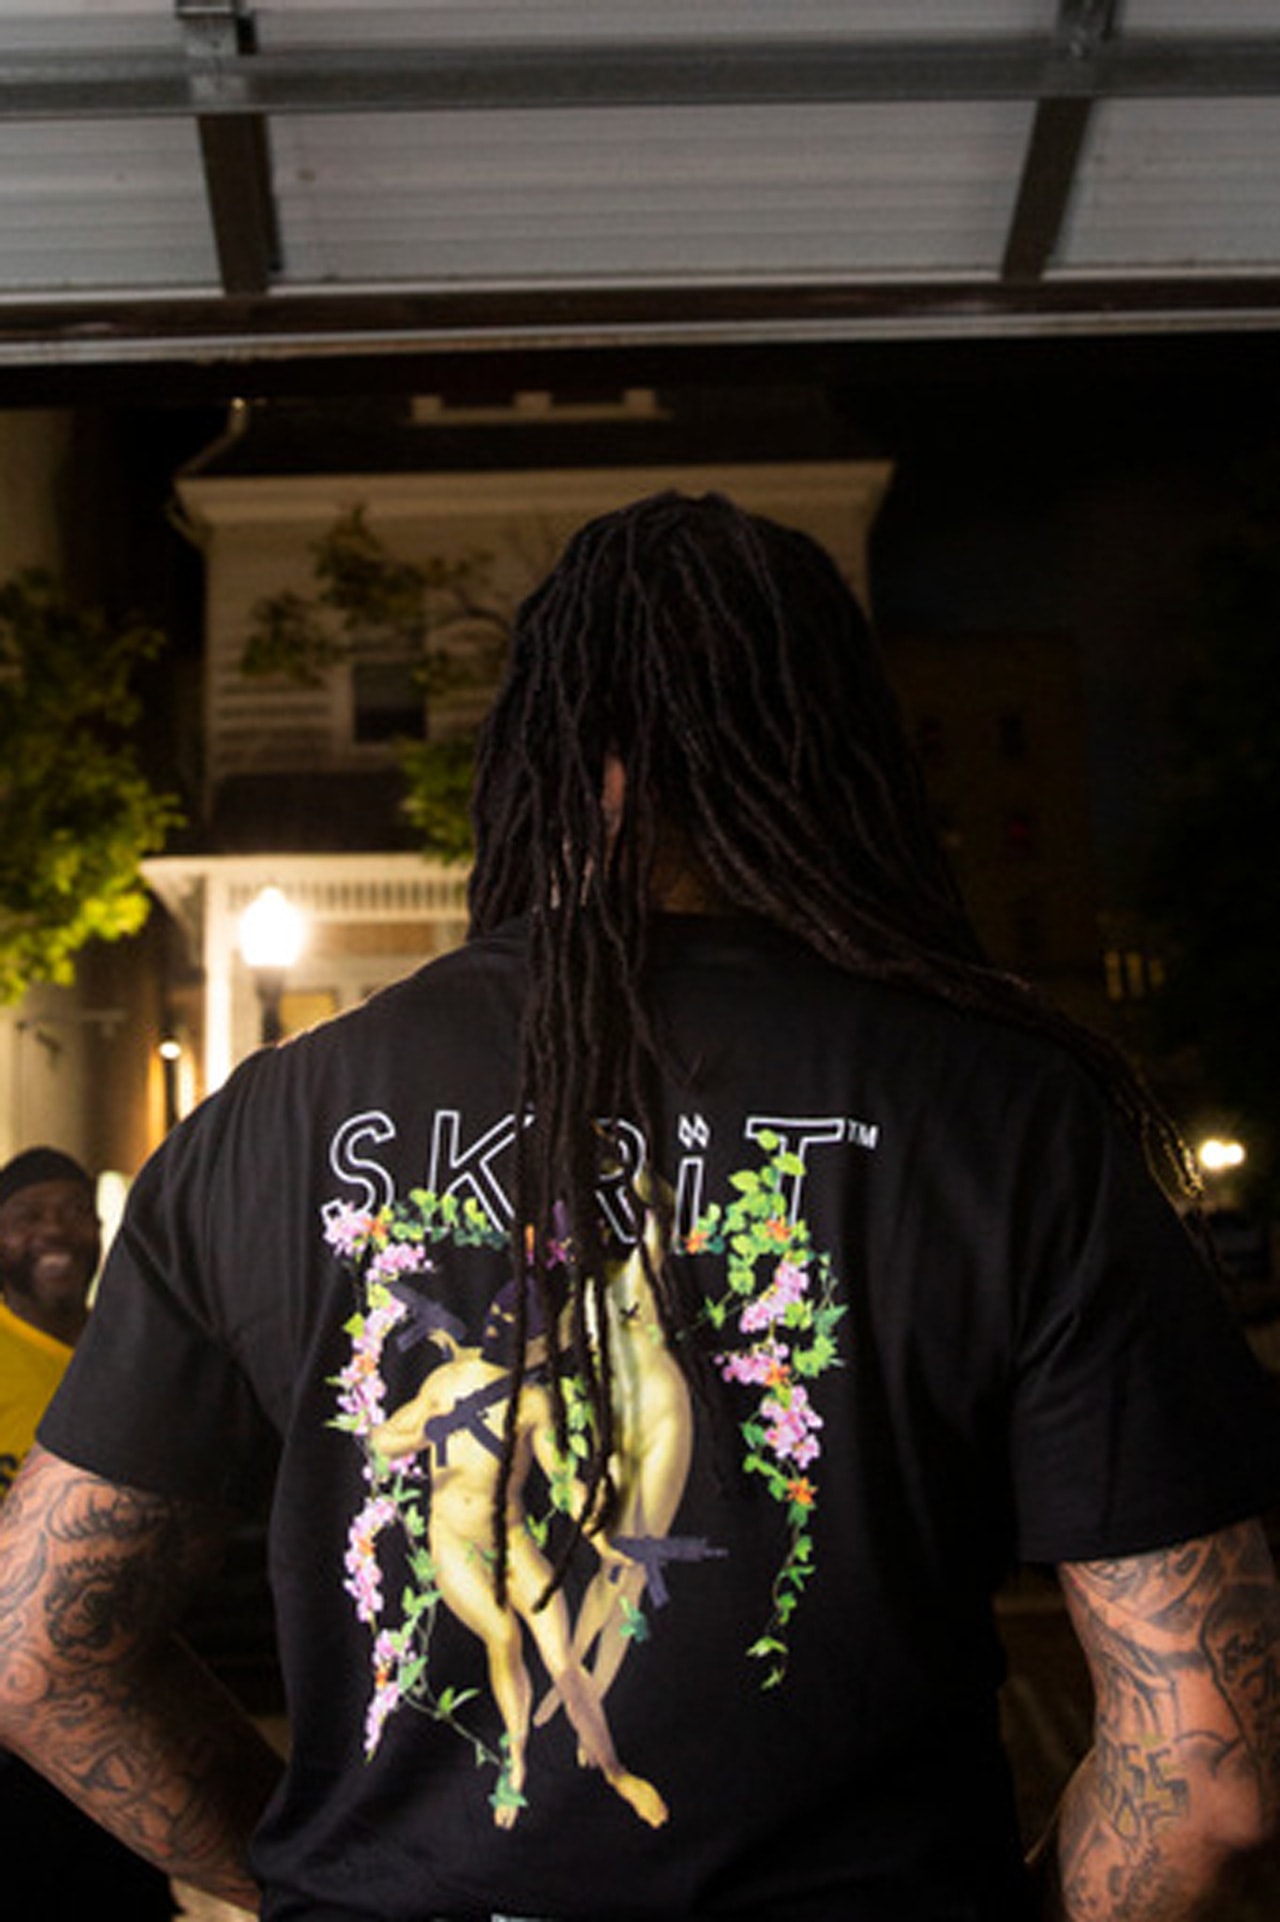 SKRIT Waka Flocka Flame Partnership Brand Ambassador collection release unisex TAO dinner launch custom designed T-shirts, oversized hoodies, silk short sets, vegan leather varsity jackets, cardigans and luxury bottoms, along with a variety of accessories